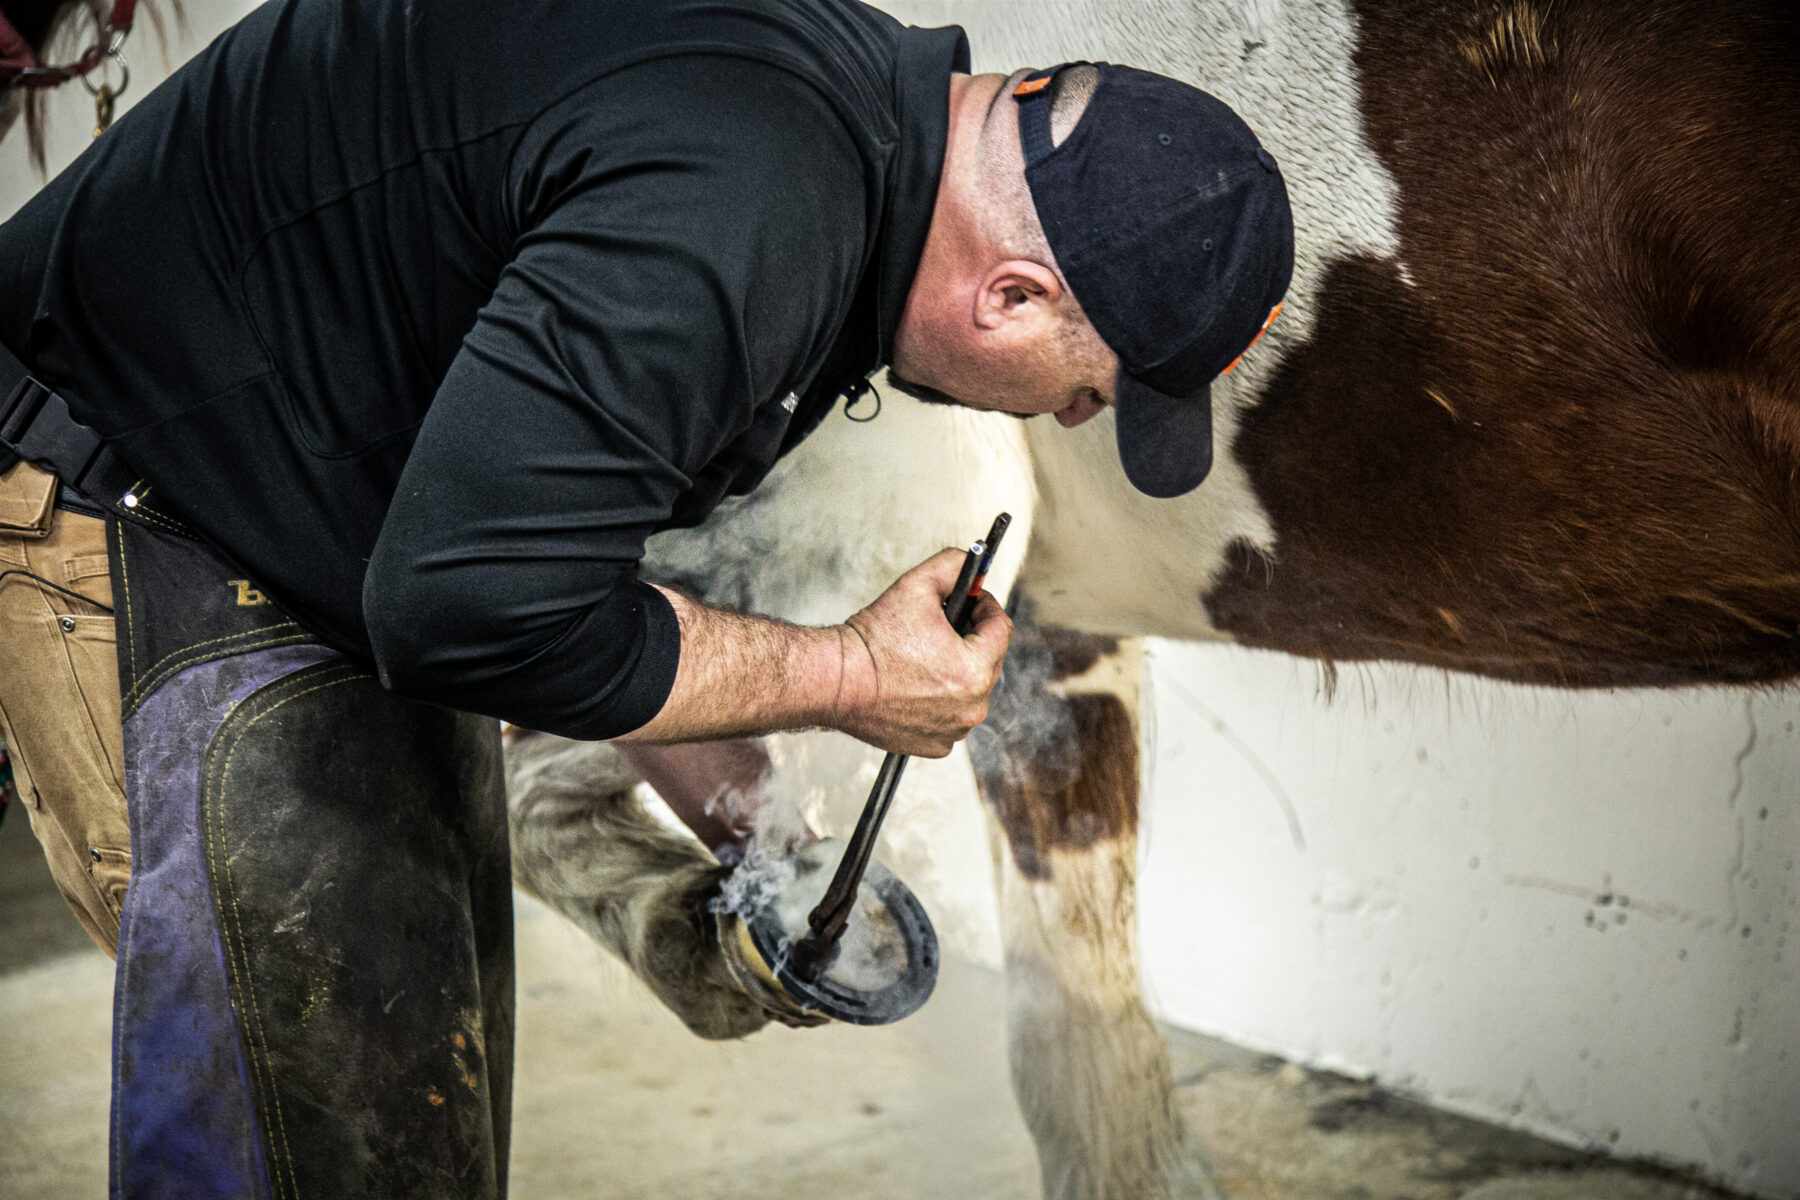 The farrier places the hot shoe on the hoof.